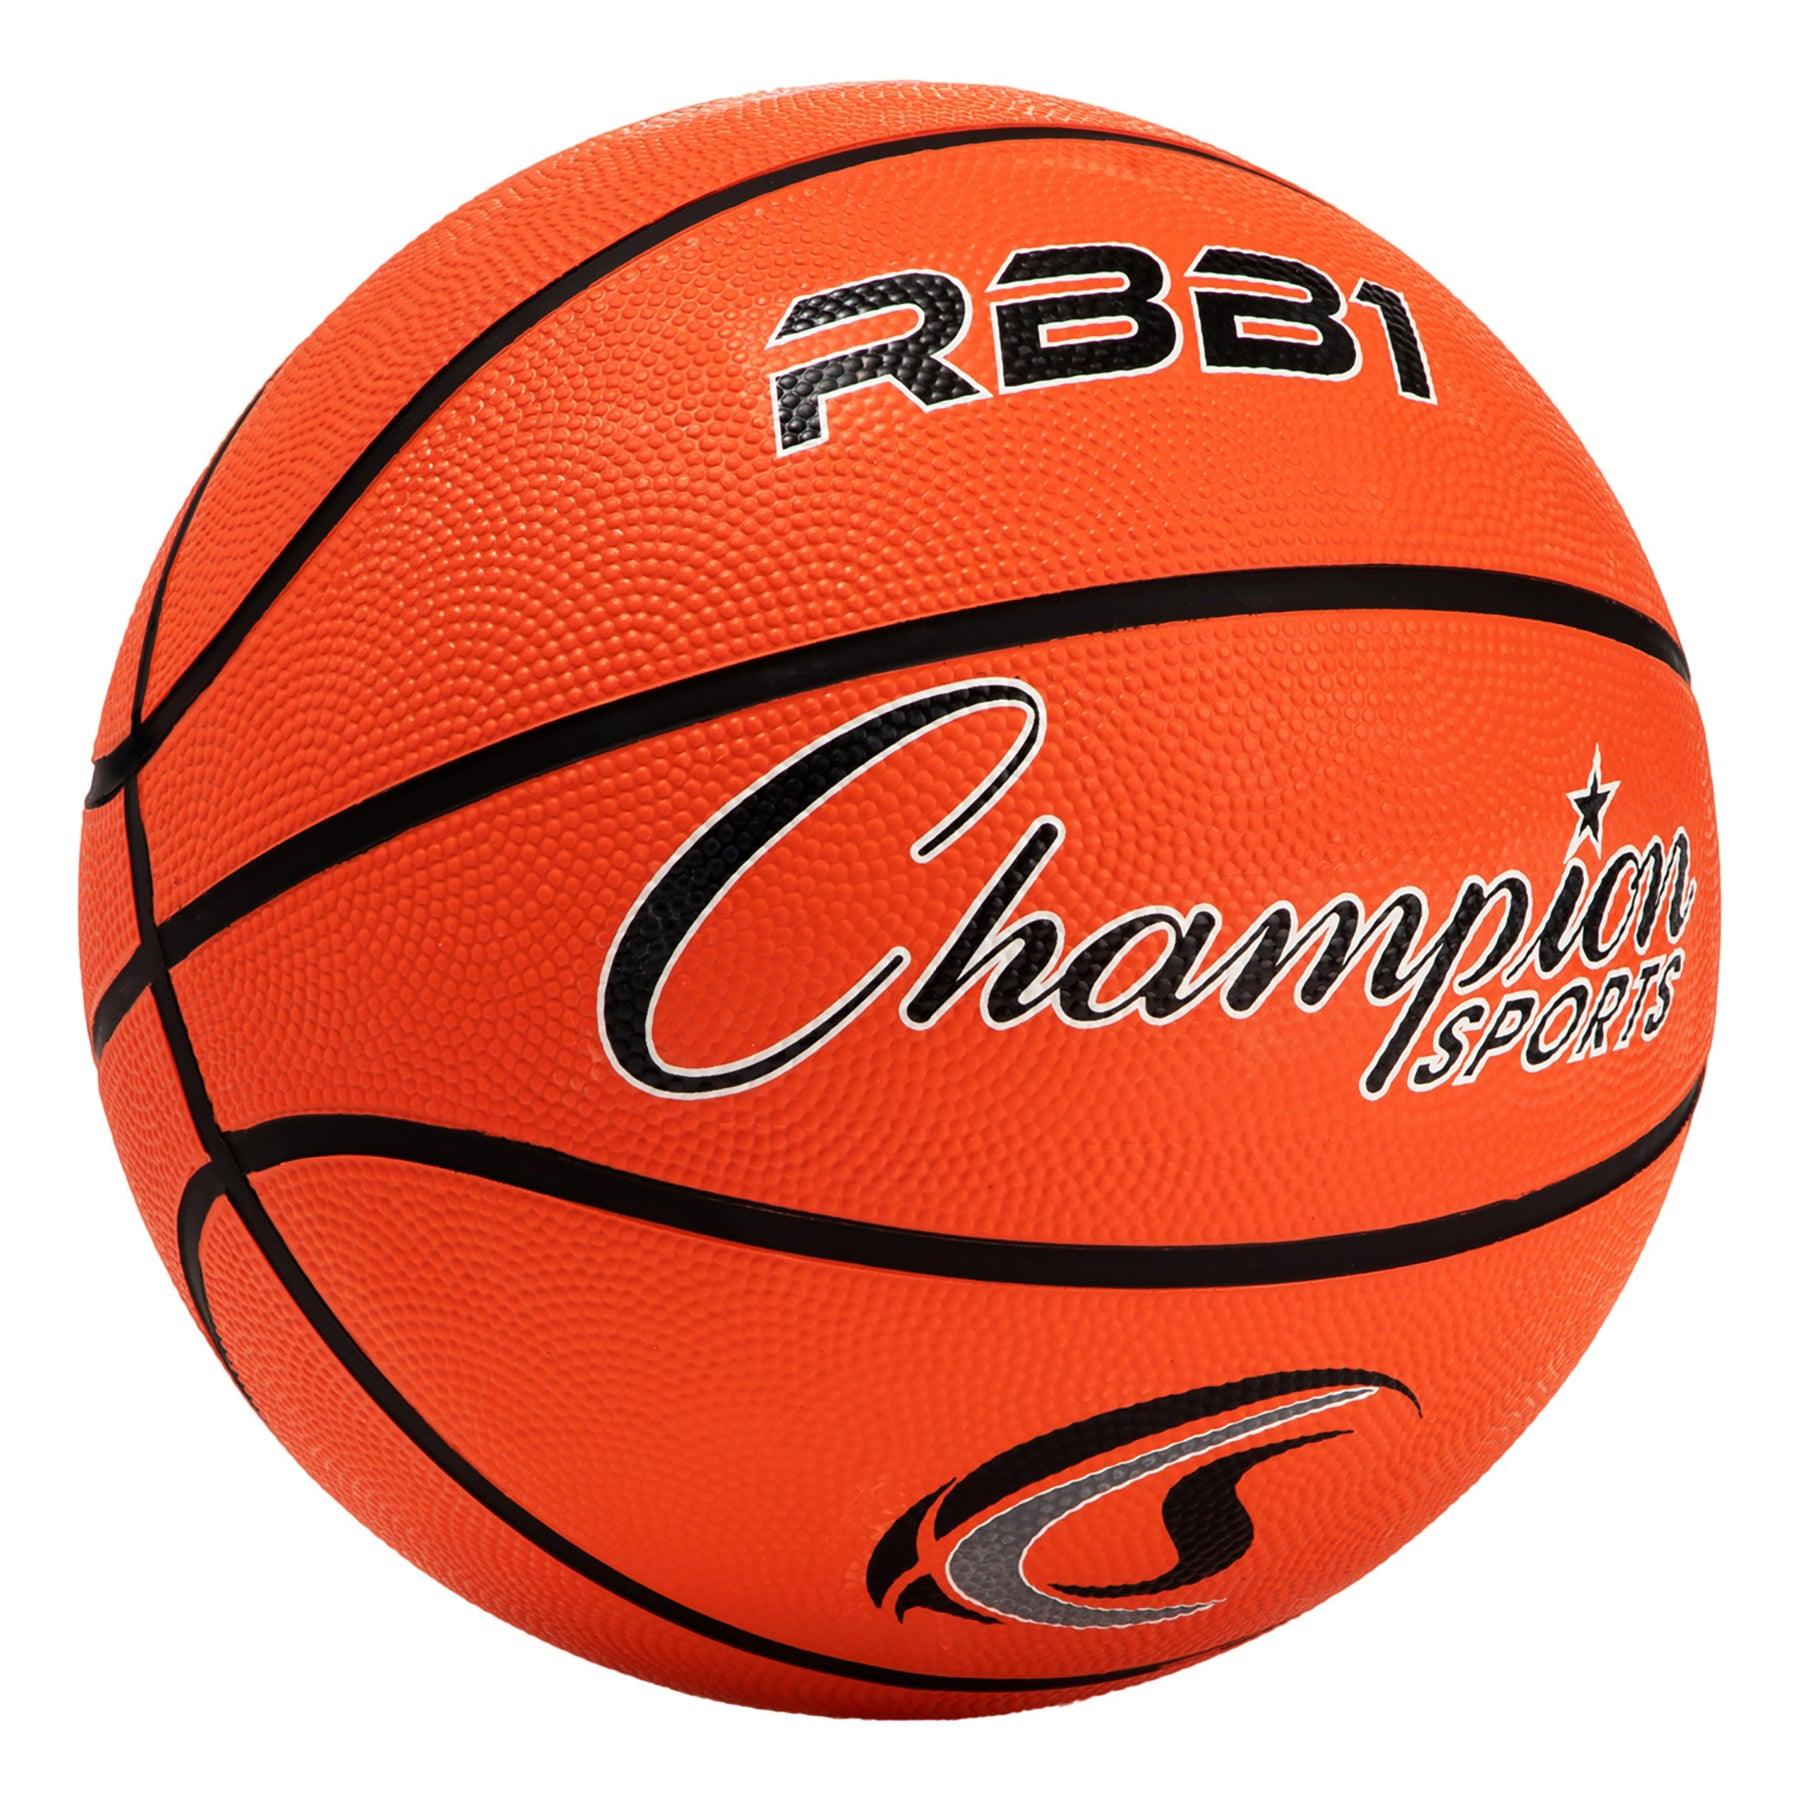 Offical Size Rubber Basketball, Orange, Pack of 2 - Loomini